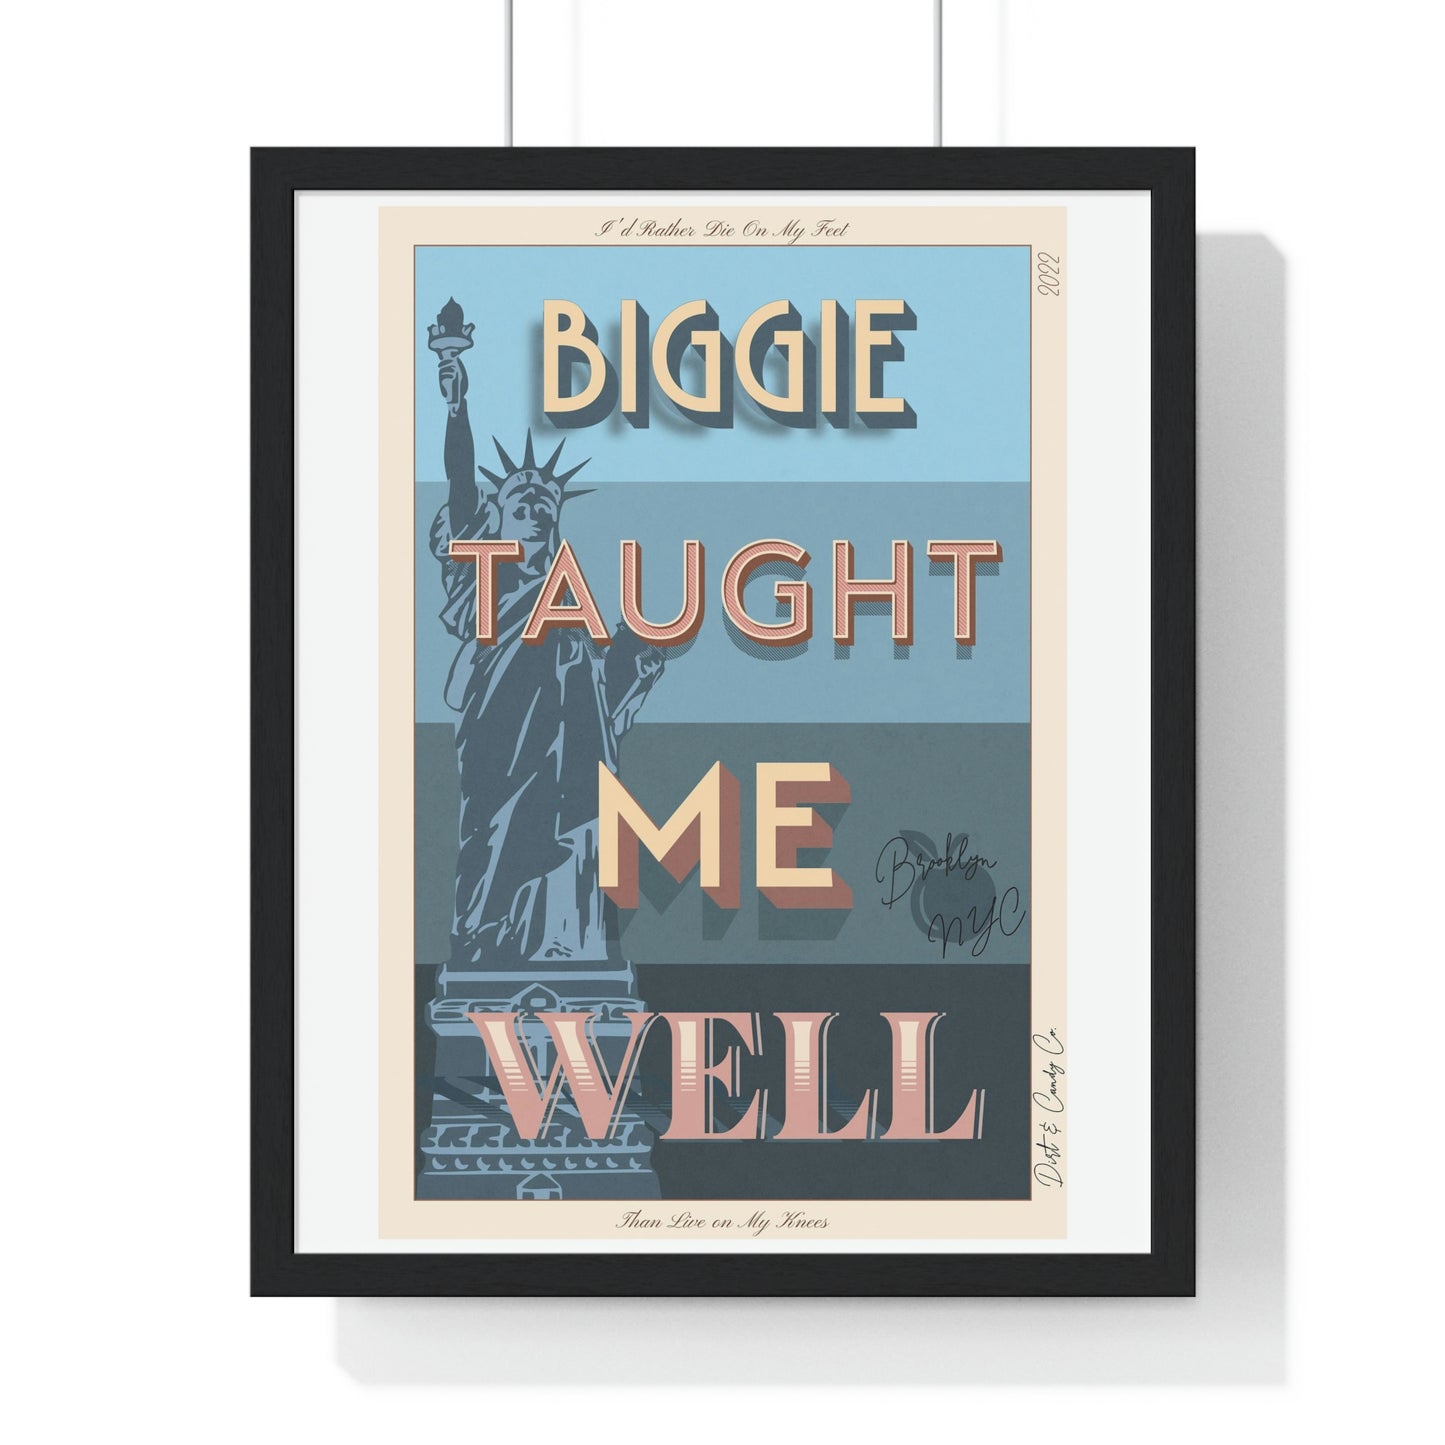 Biggie taught me well:"I'd rather die on my feet, than die on my knees" Stylish poster artwork for any room.  Premium Framed Vertical Poster